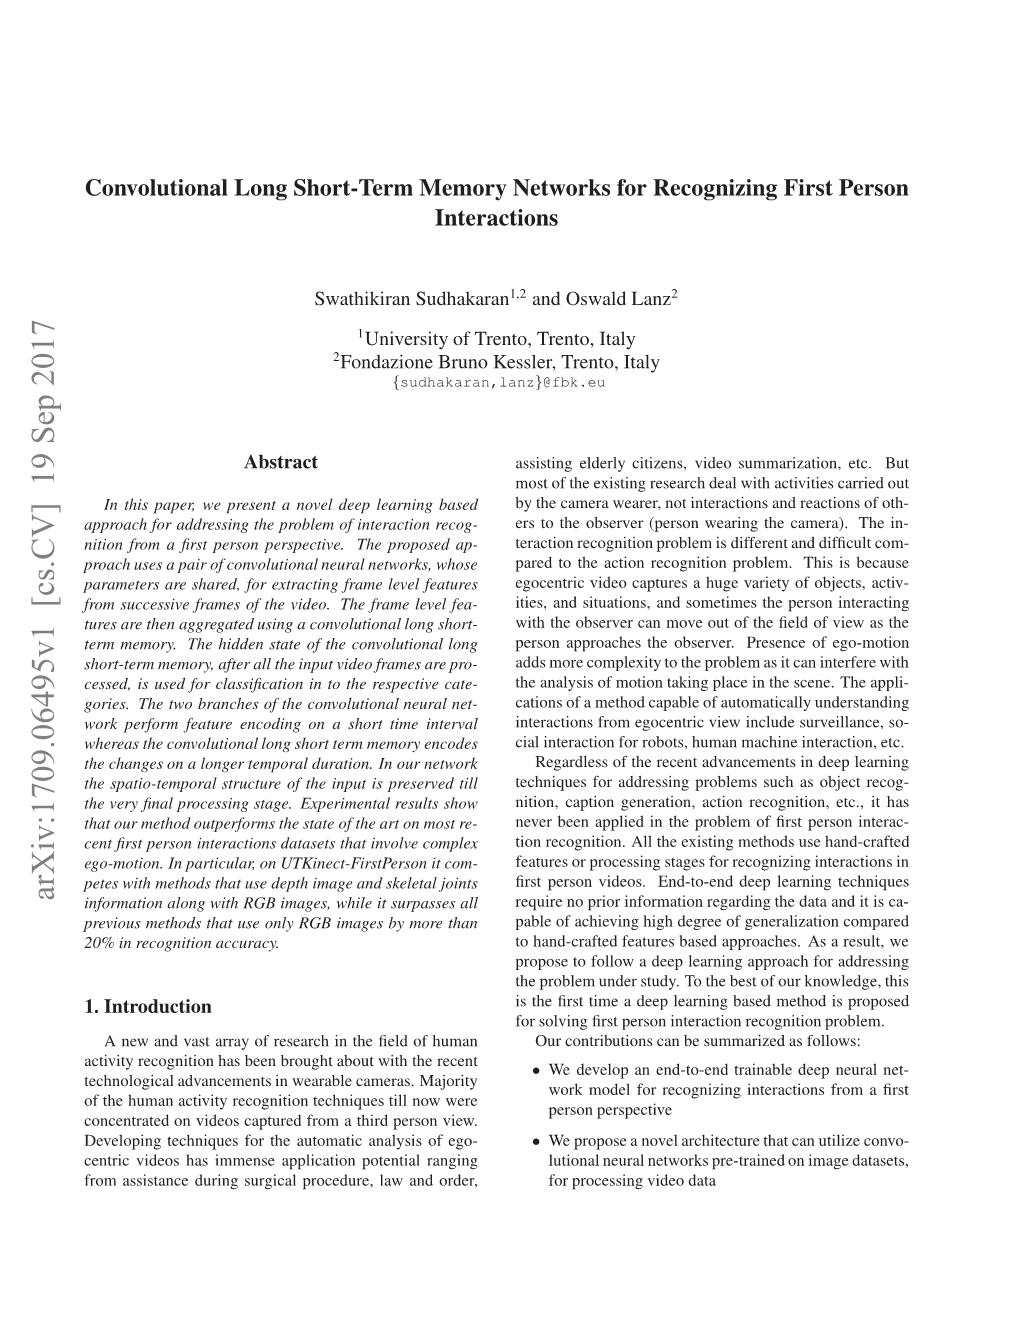 Convolutional Long Short-Term Memory Networks for Recognizing